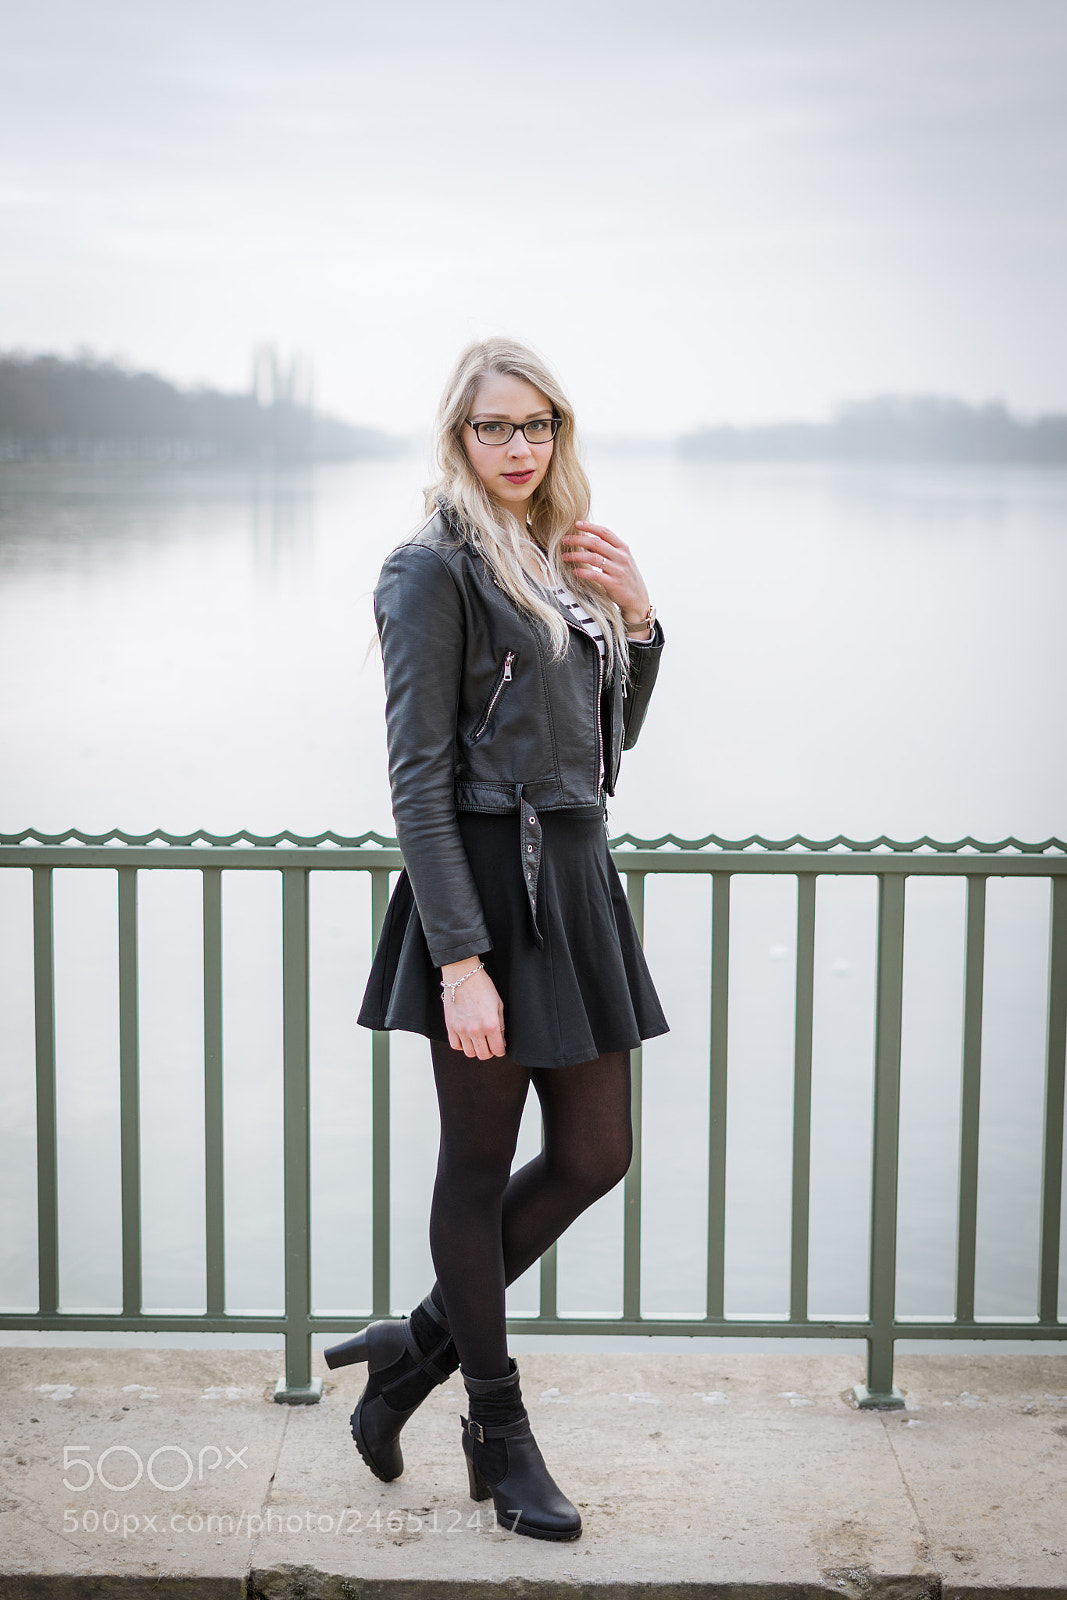 Sony a7 II sample photo. Fotoshooting mit jenny in photography